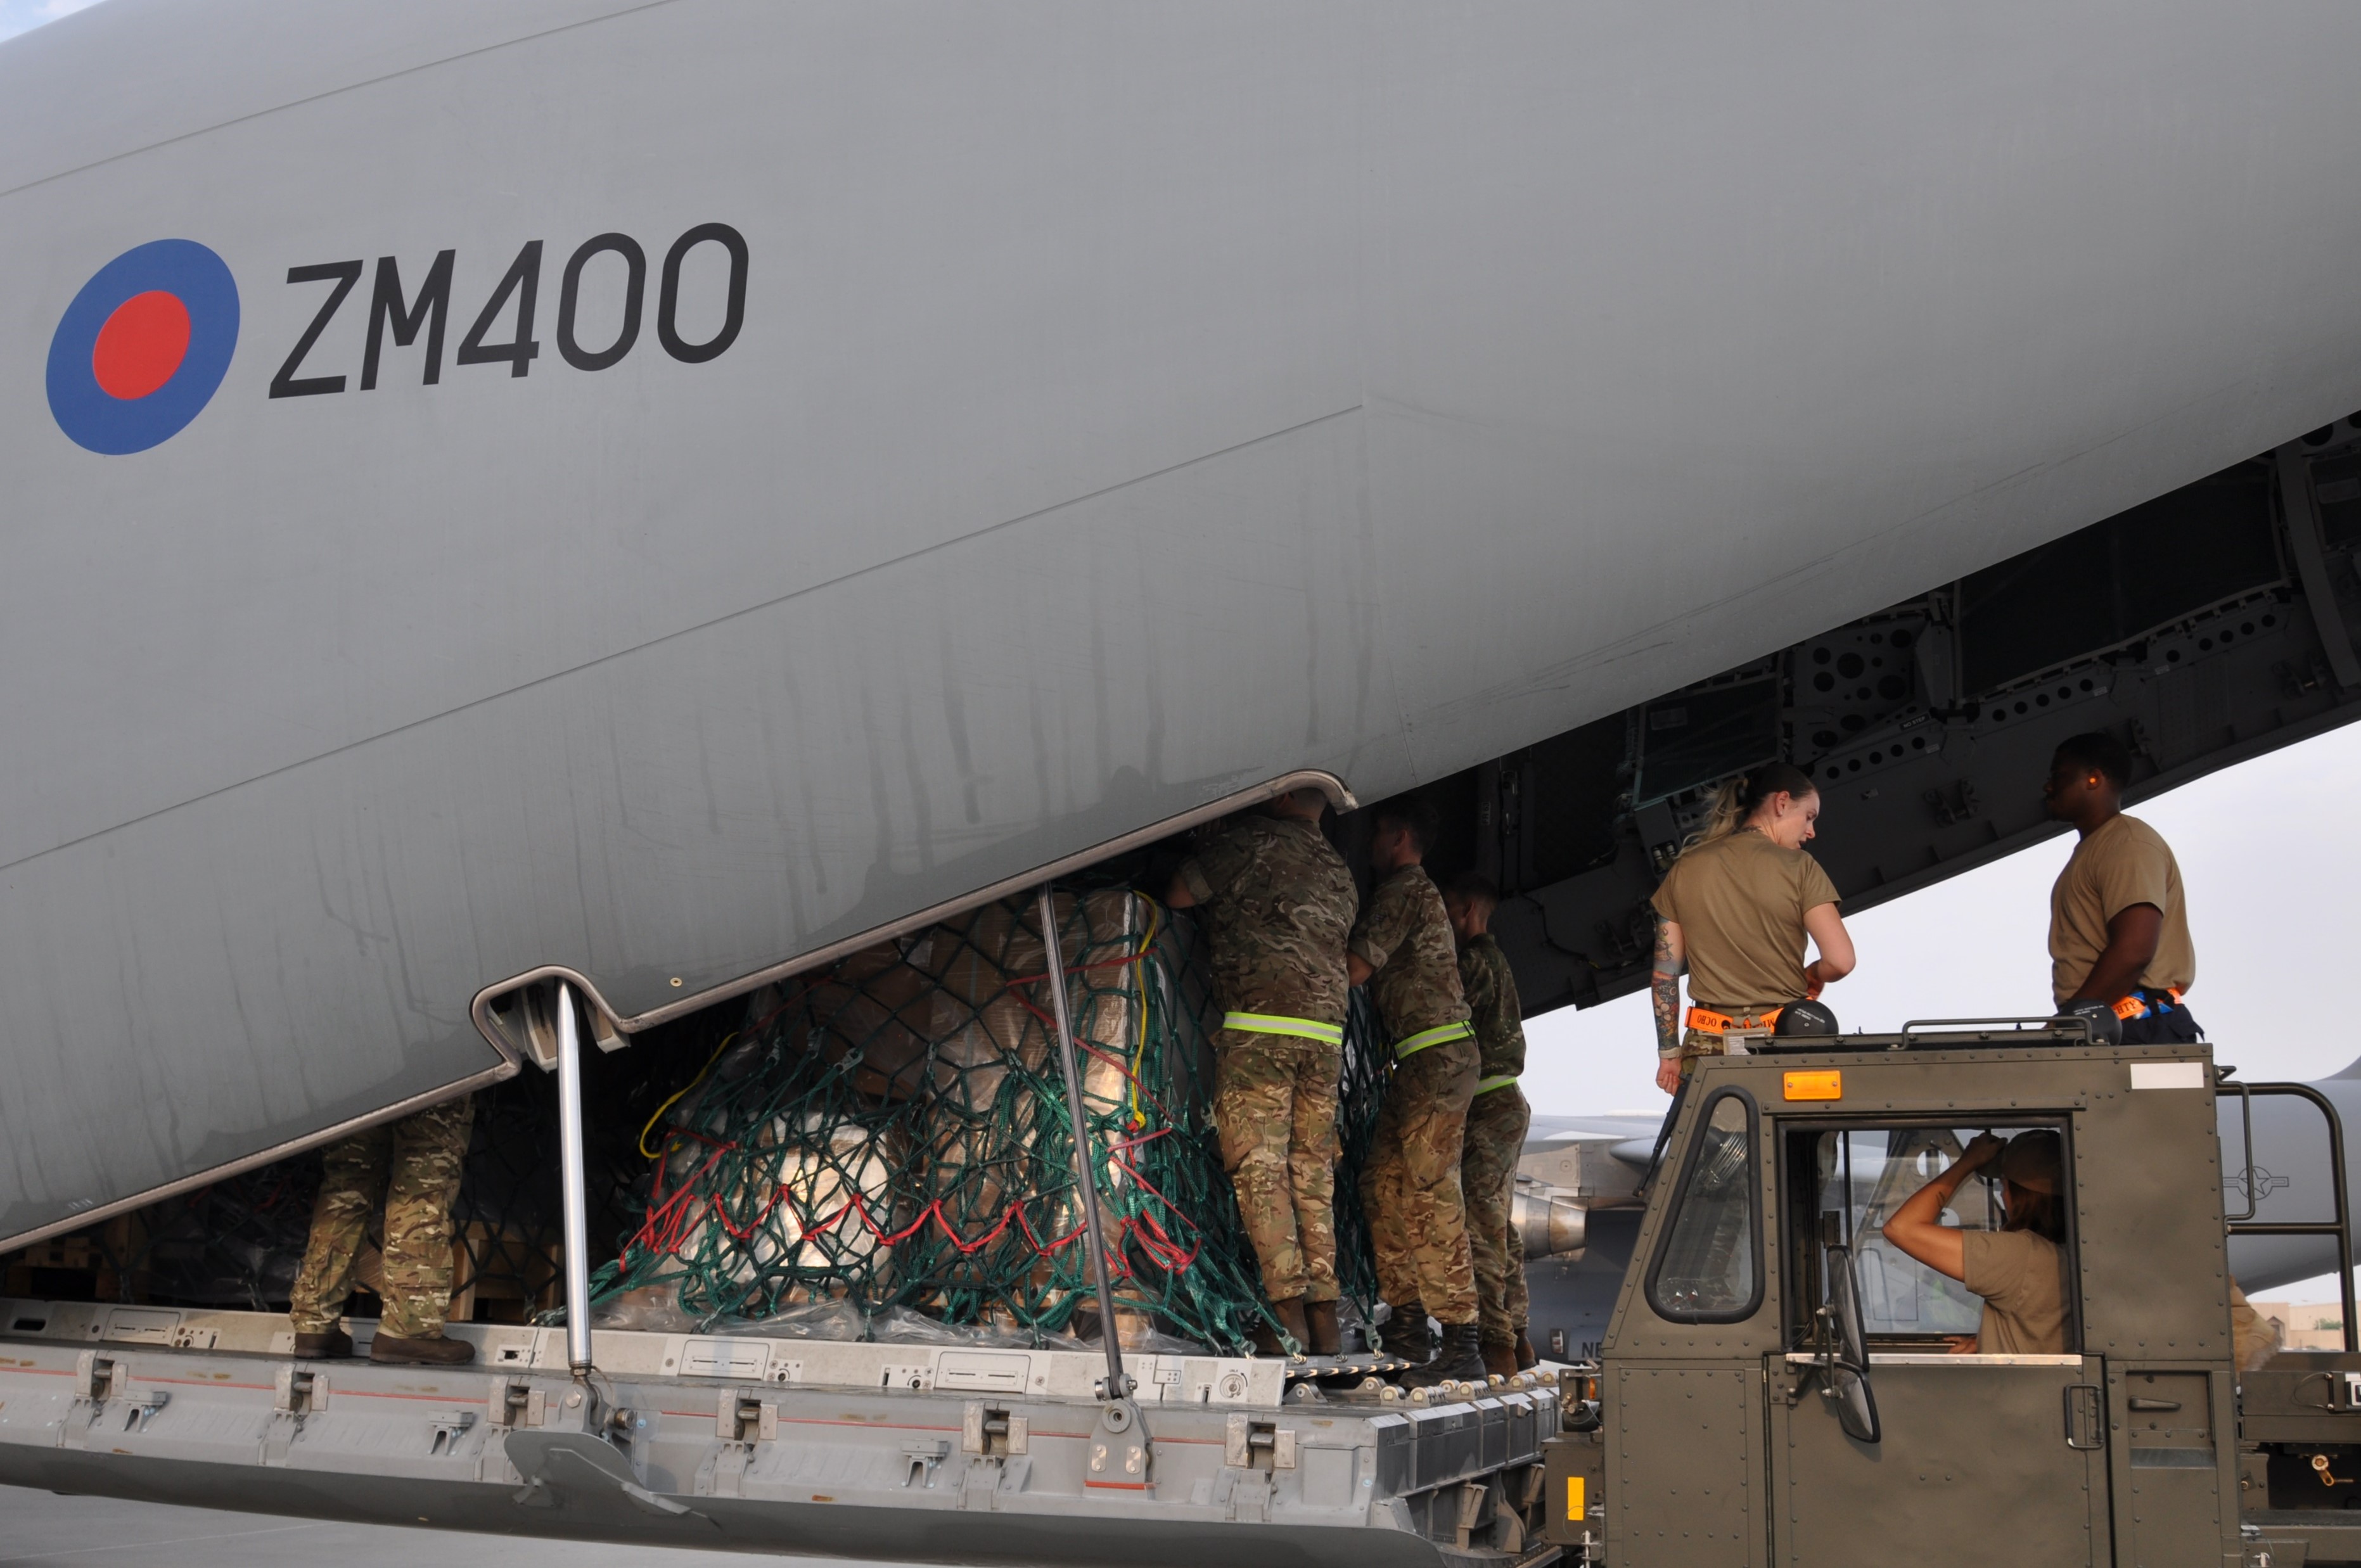 Supplies being loaded onto the Atlas aircraft